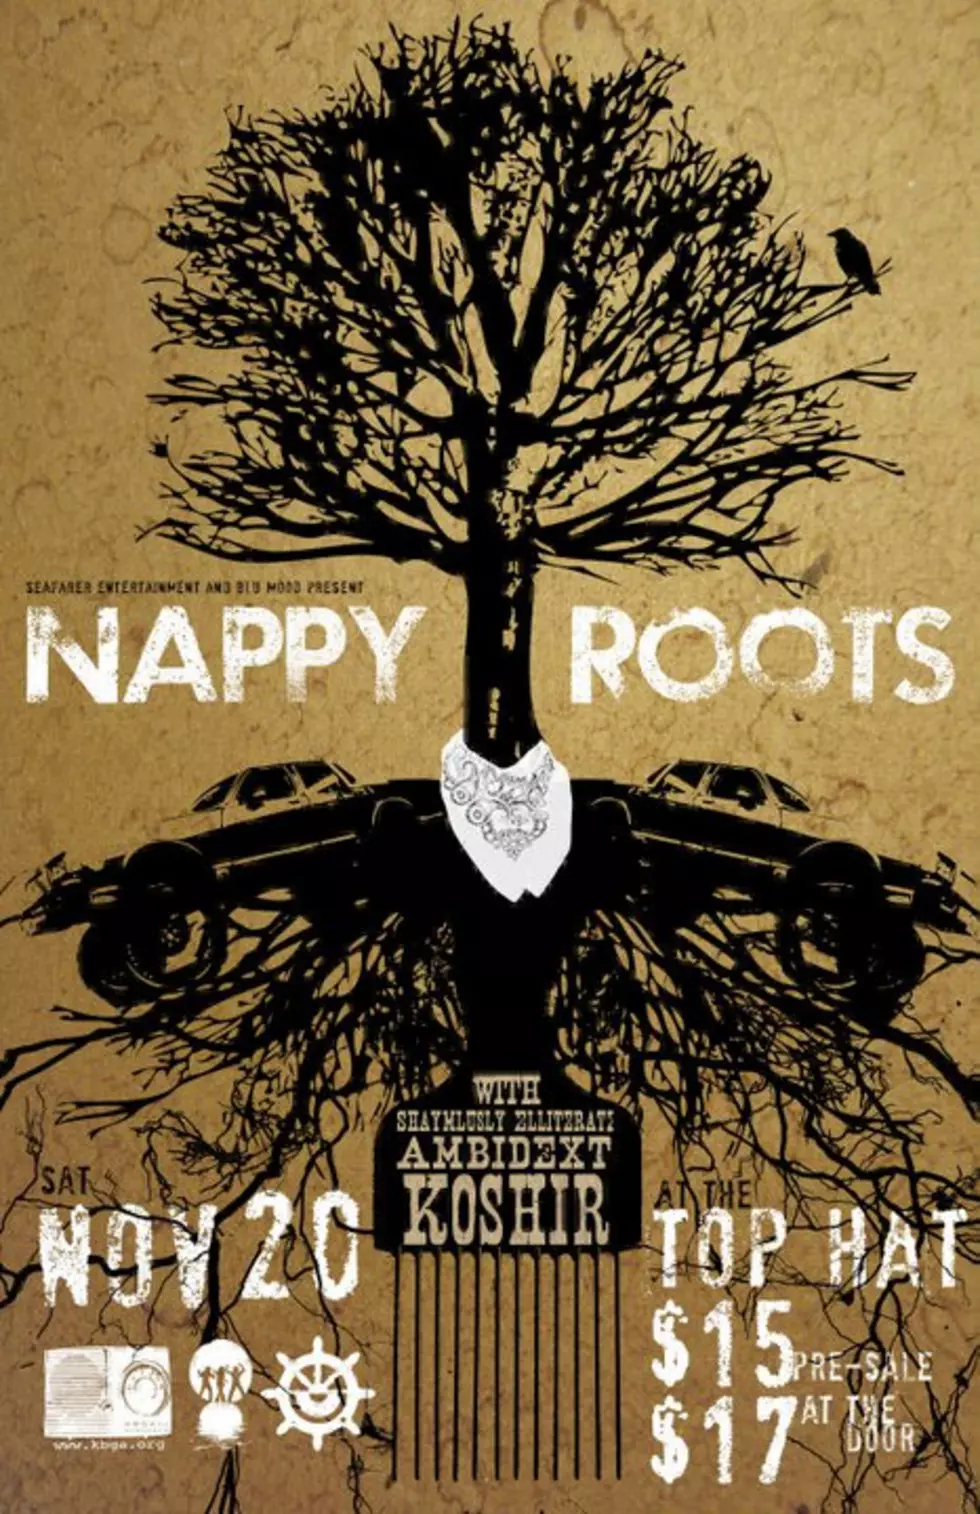 The Nappy Roots Concert At The Top Hat